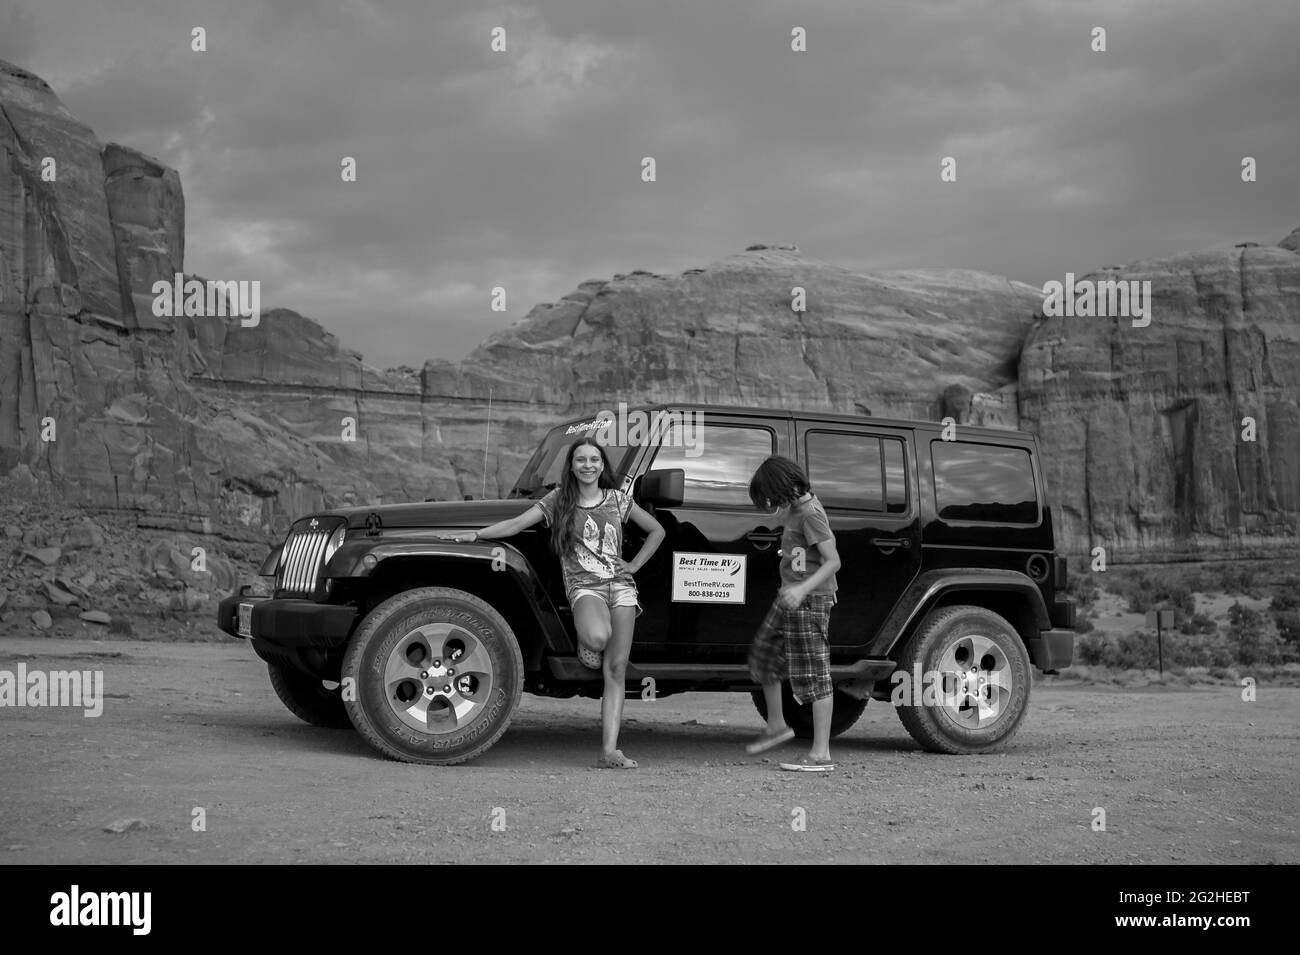 A girl and a boy in front of a Jeep Wrangler and a classic view of Monument  Valley from Artist Point. Monument Valley Navajo Tribal Park, Utah and  Arizona, USA Stock Photo -